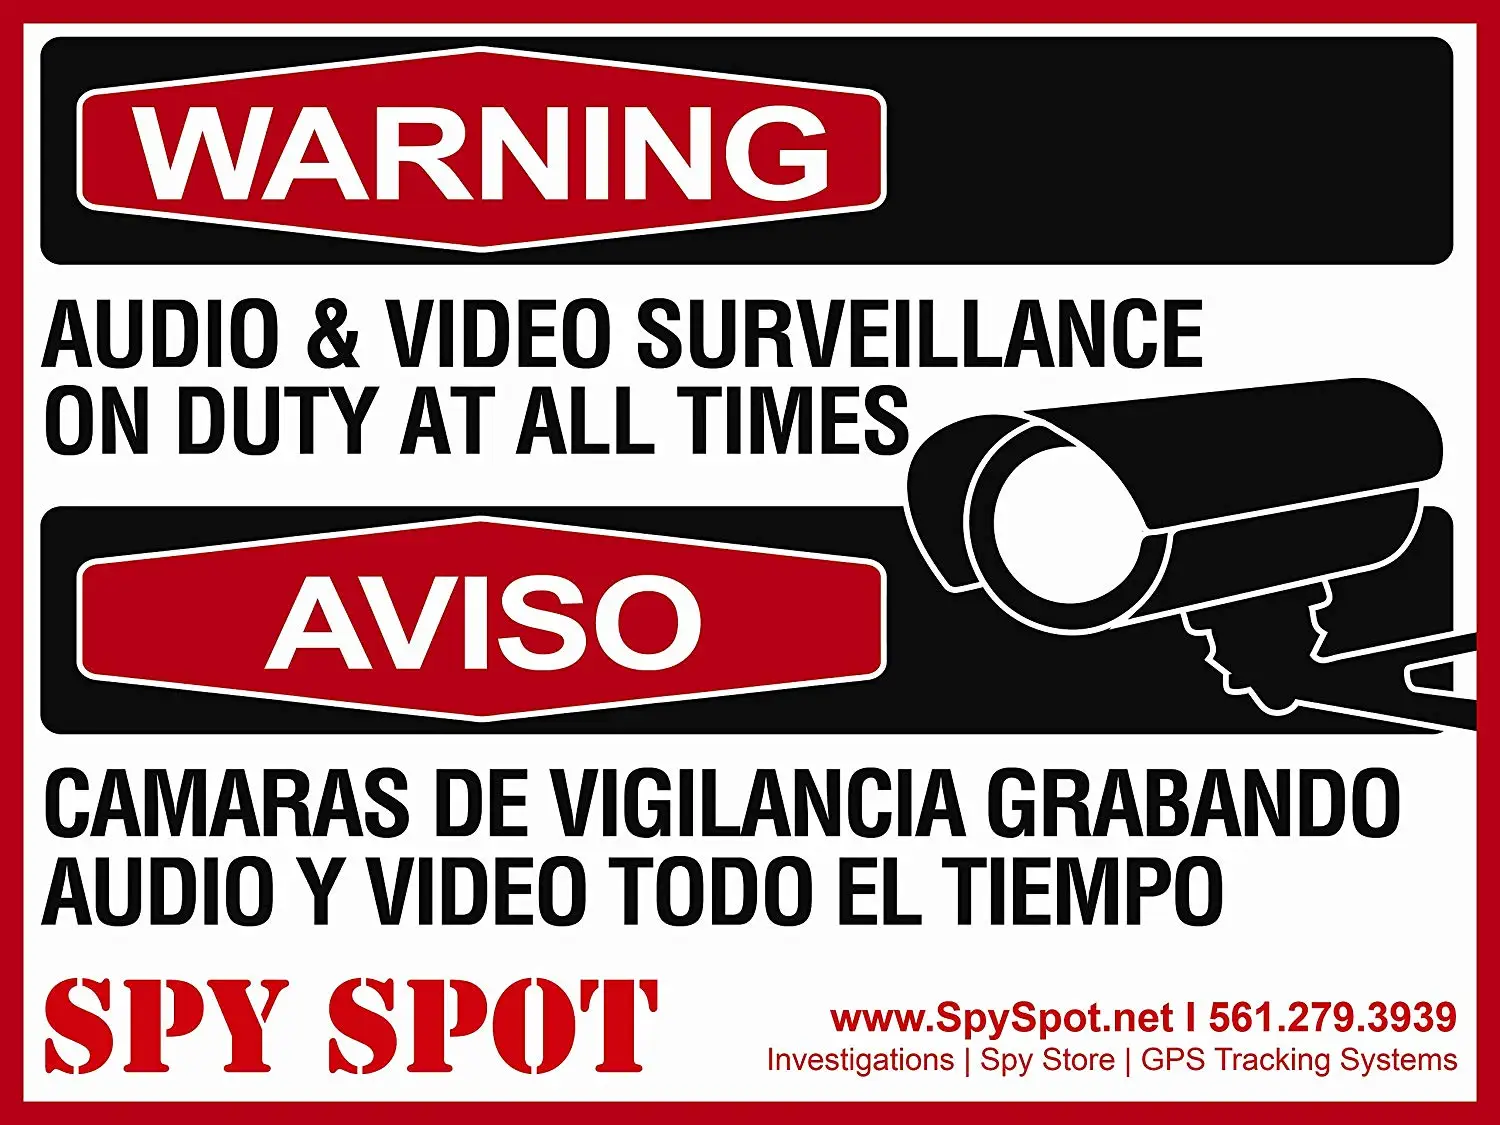 For Warning Audio and Video Surveillance on Duty At All Times Plastic CCTV Sign in English / Spanish